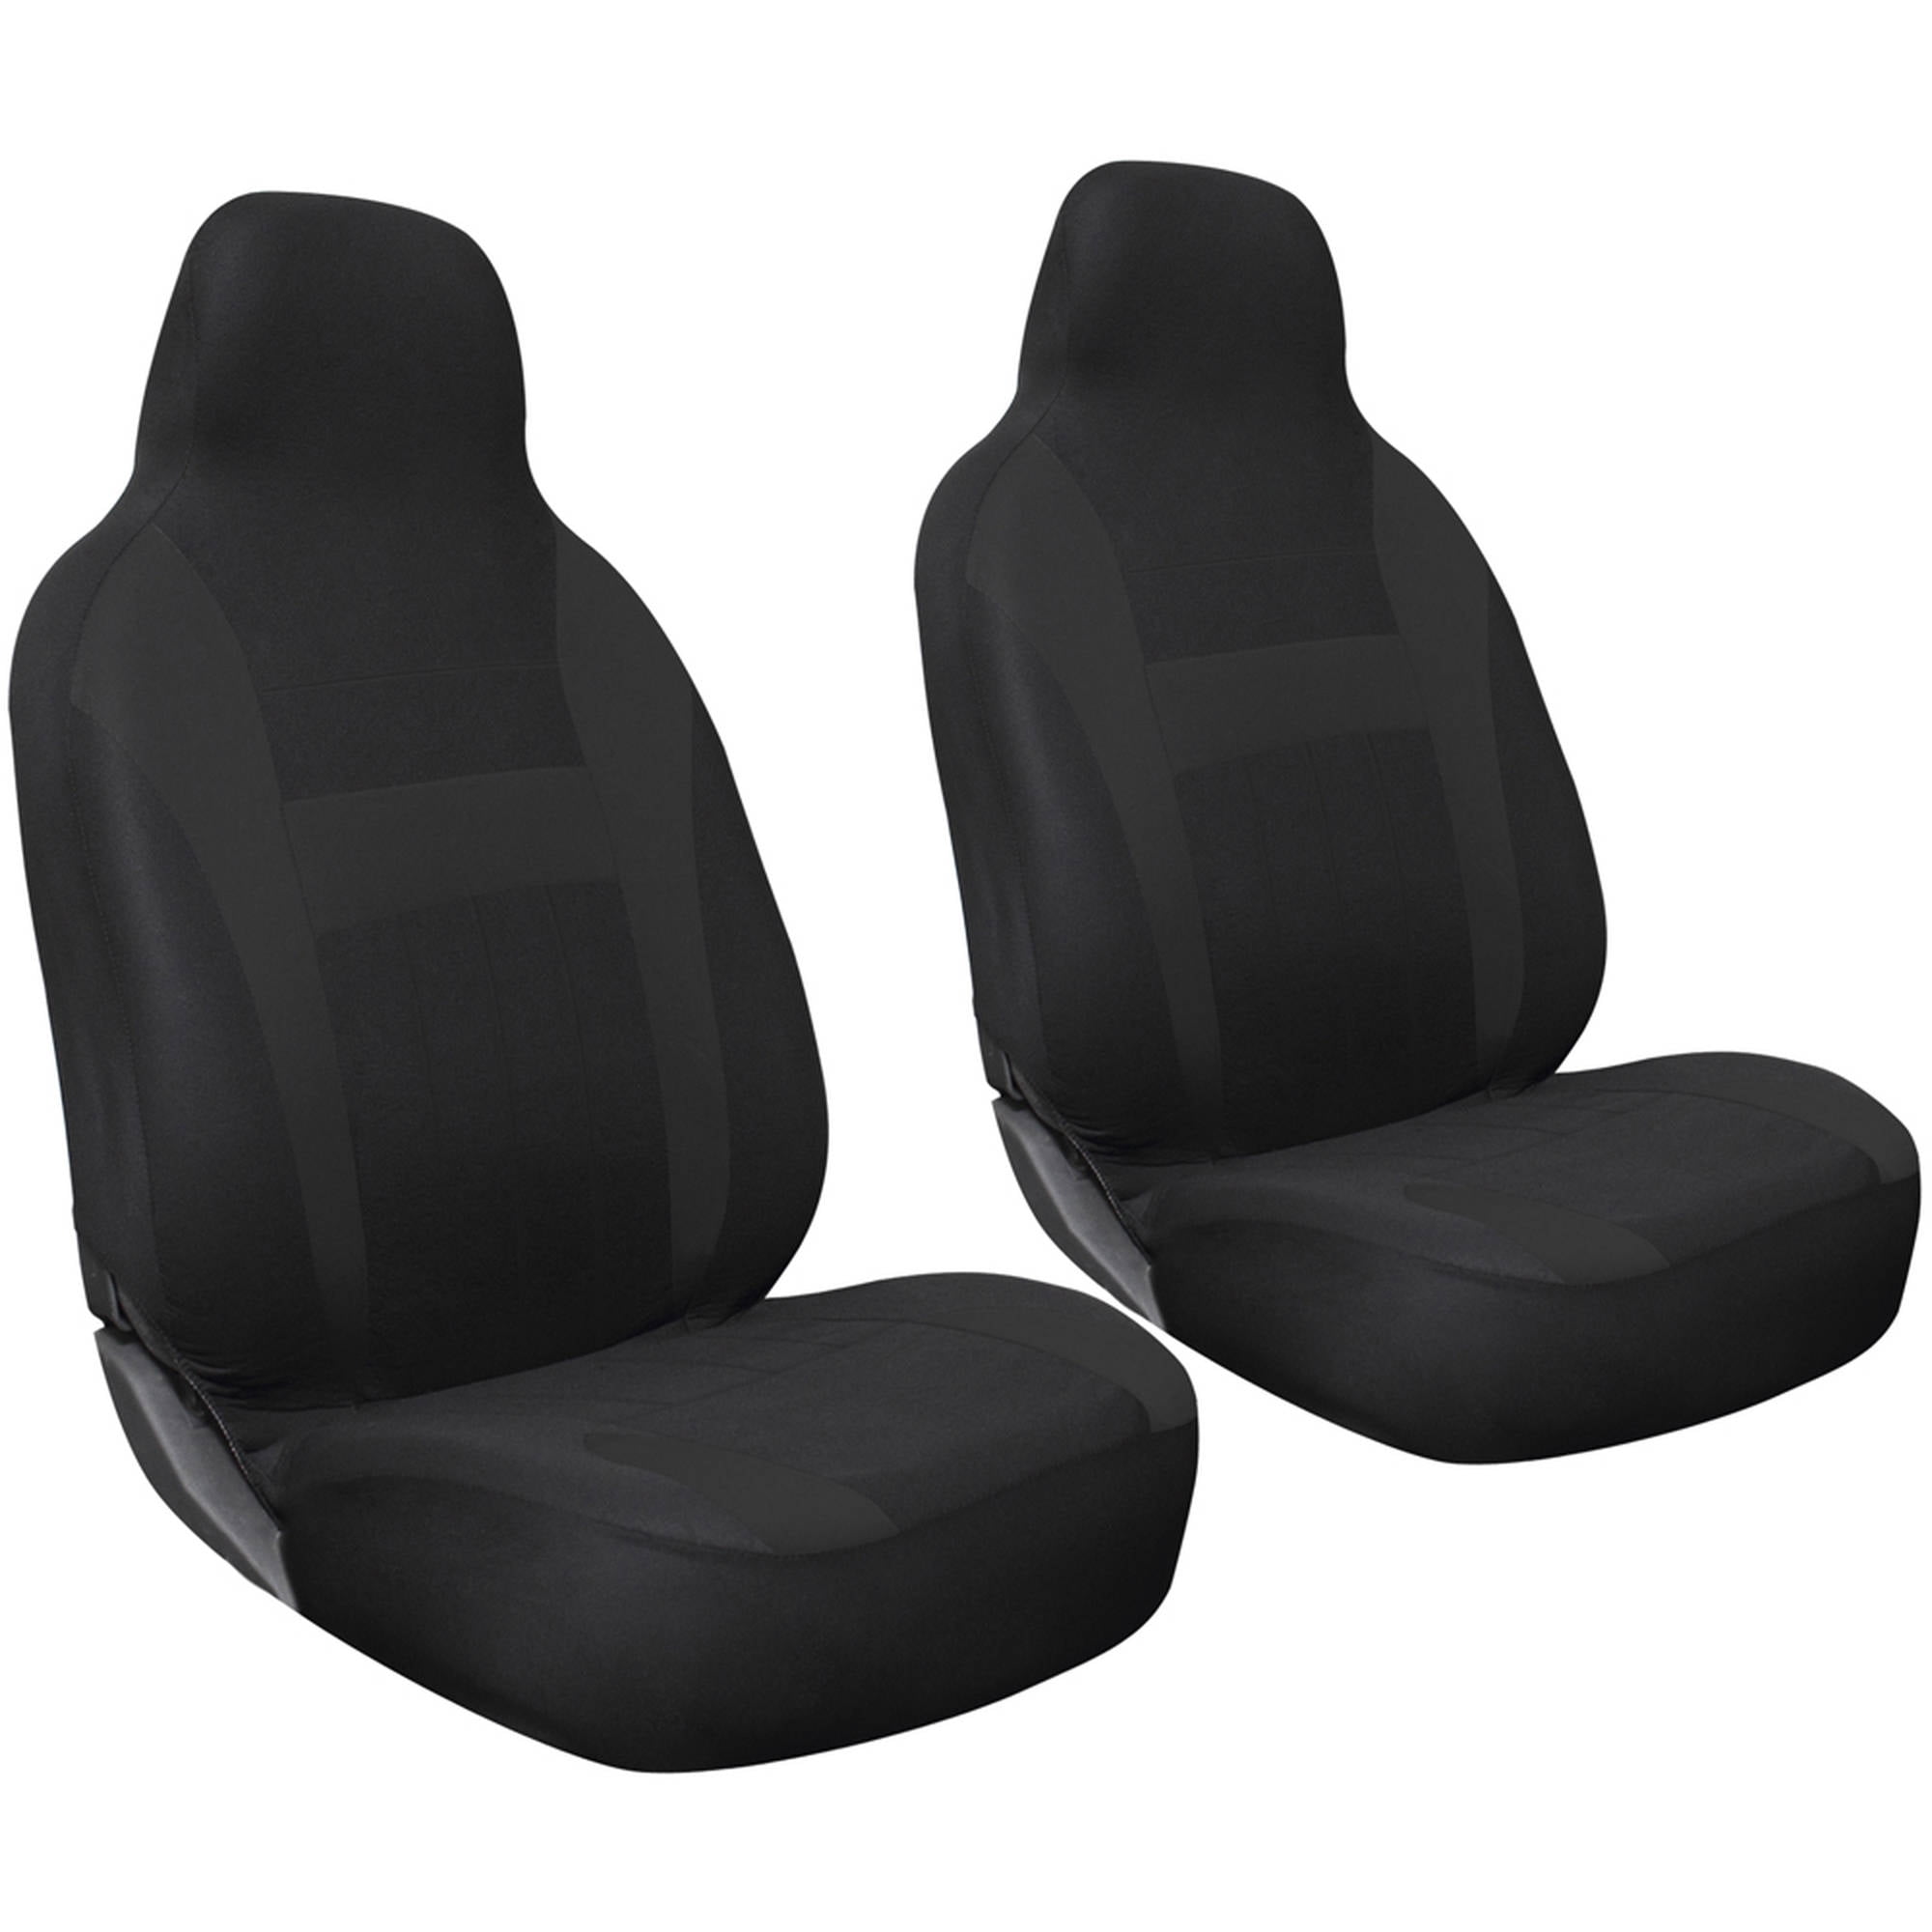 Oxgord 2 Piece Integrated Flat Cloth Bucket Seat Covers Universal Fit For Car Truck Van Suv Airbag Compatible Com - Truck Front Bucket Seat Covers